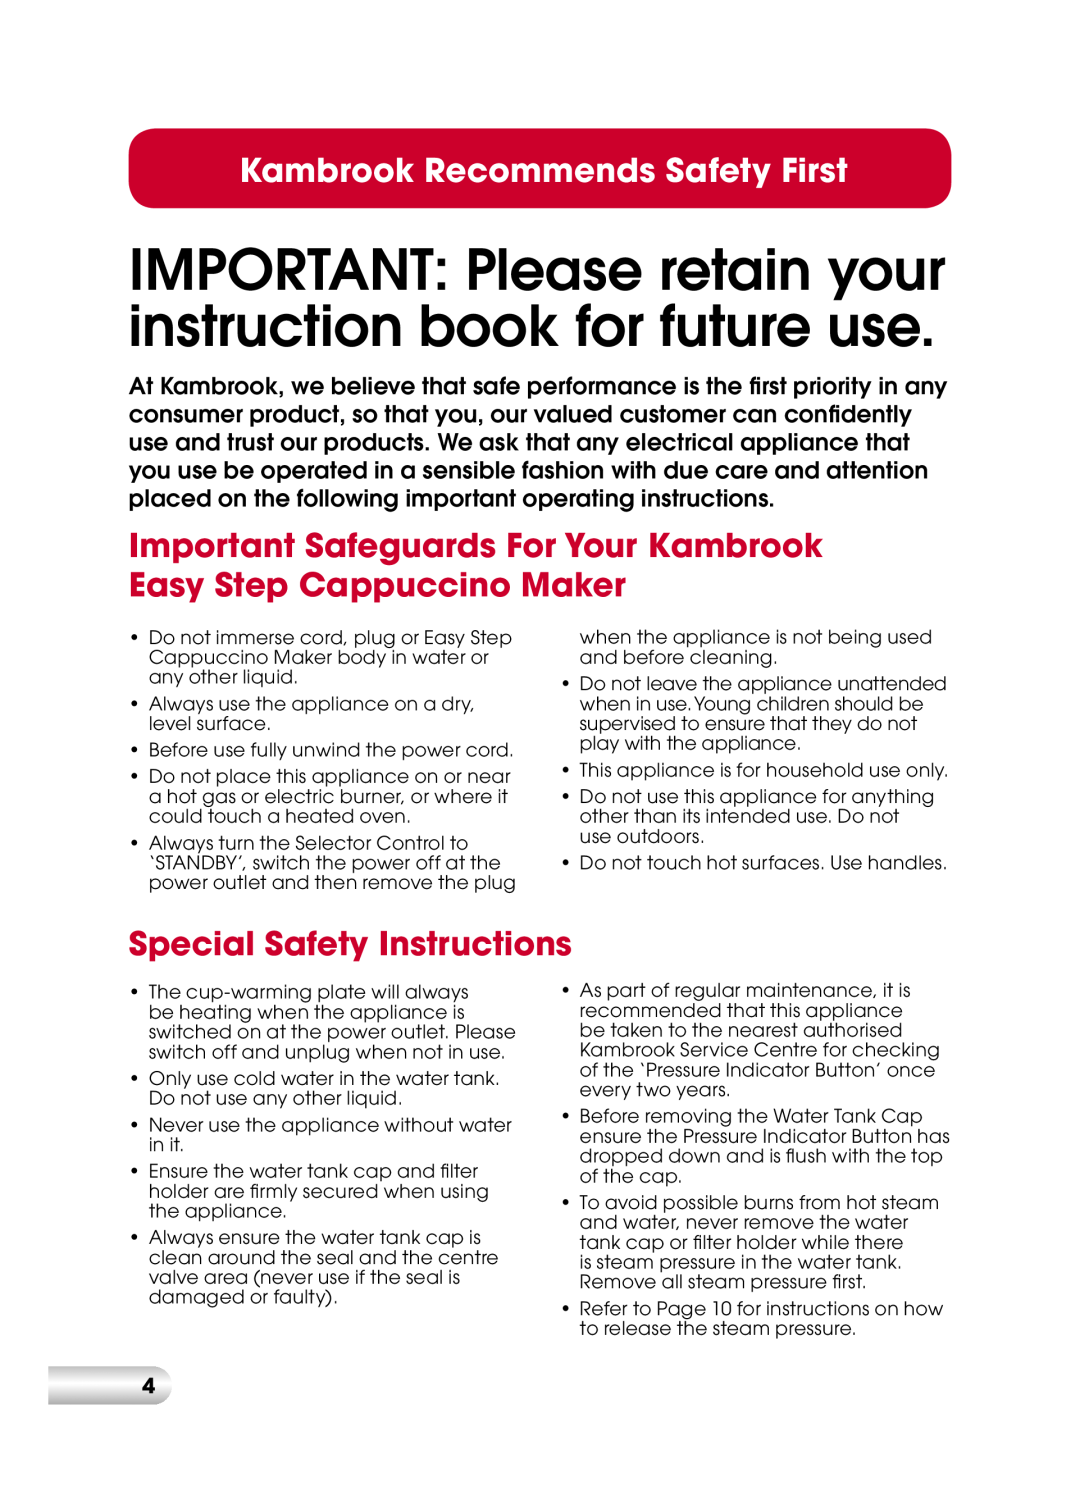 Kambrook KES110 manual Important Safeguards For Your Kambrook Easy Step Cappuccino Maker, Special Safety Instructions 